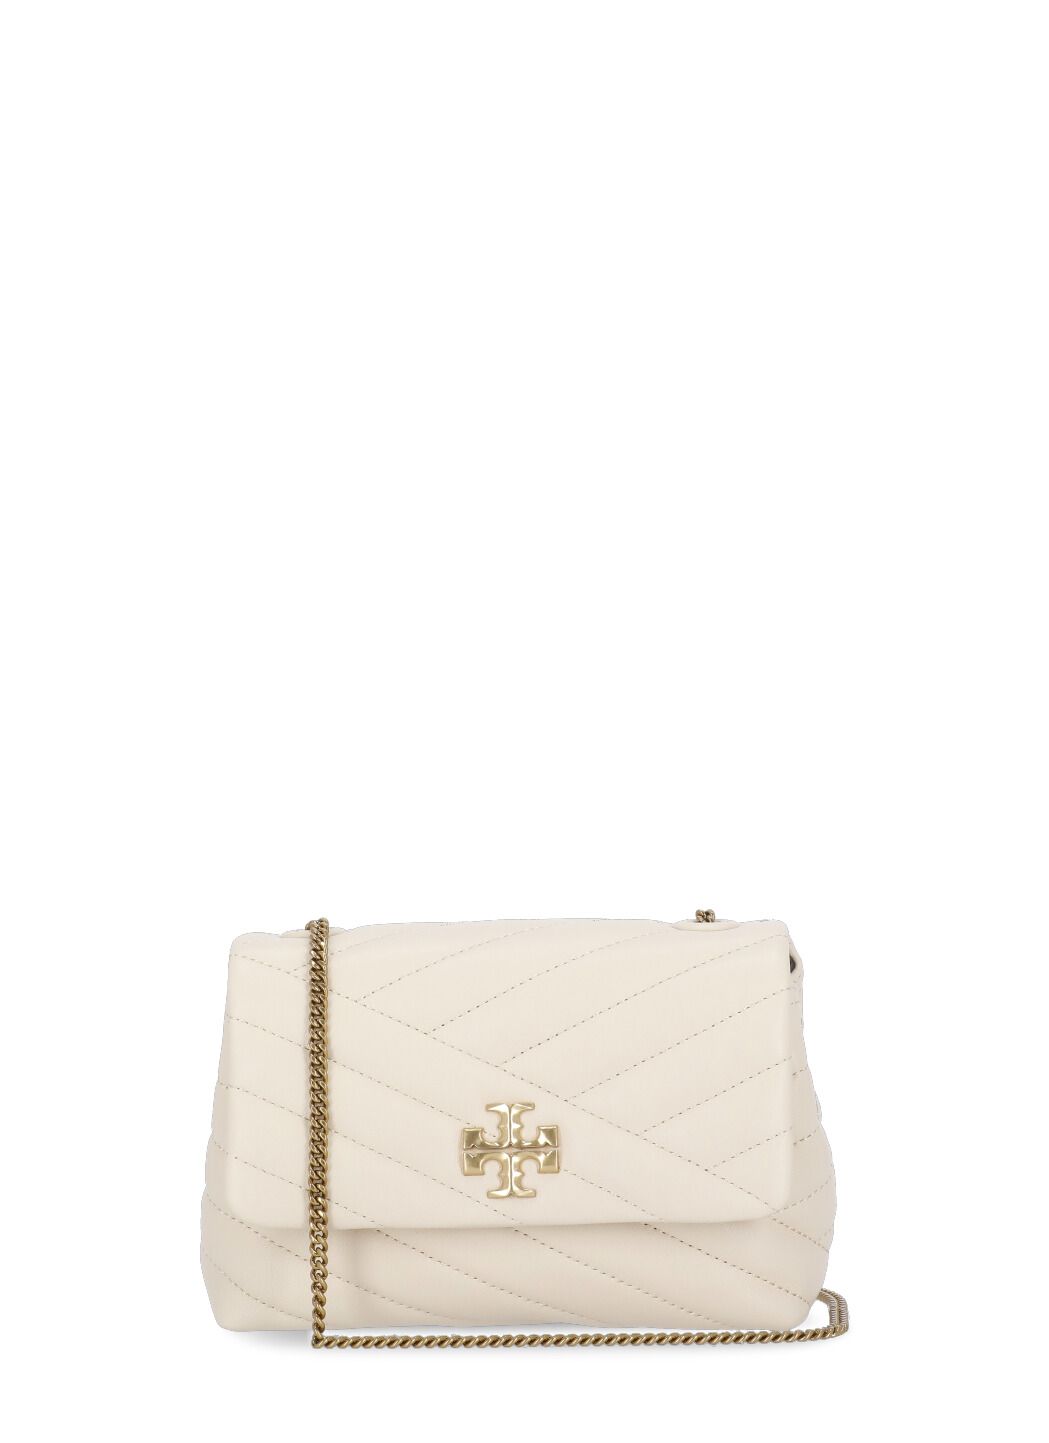 Tory Burch Mini Kira Chevron Quilted Leather Top Handle Bag In New Cream